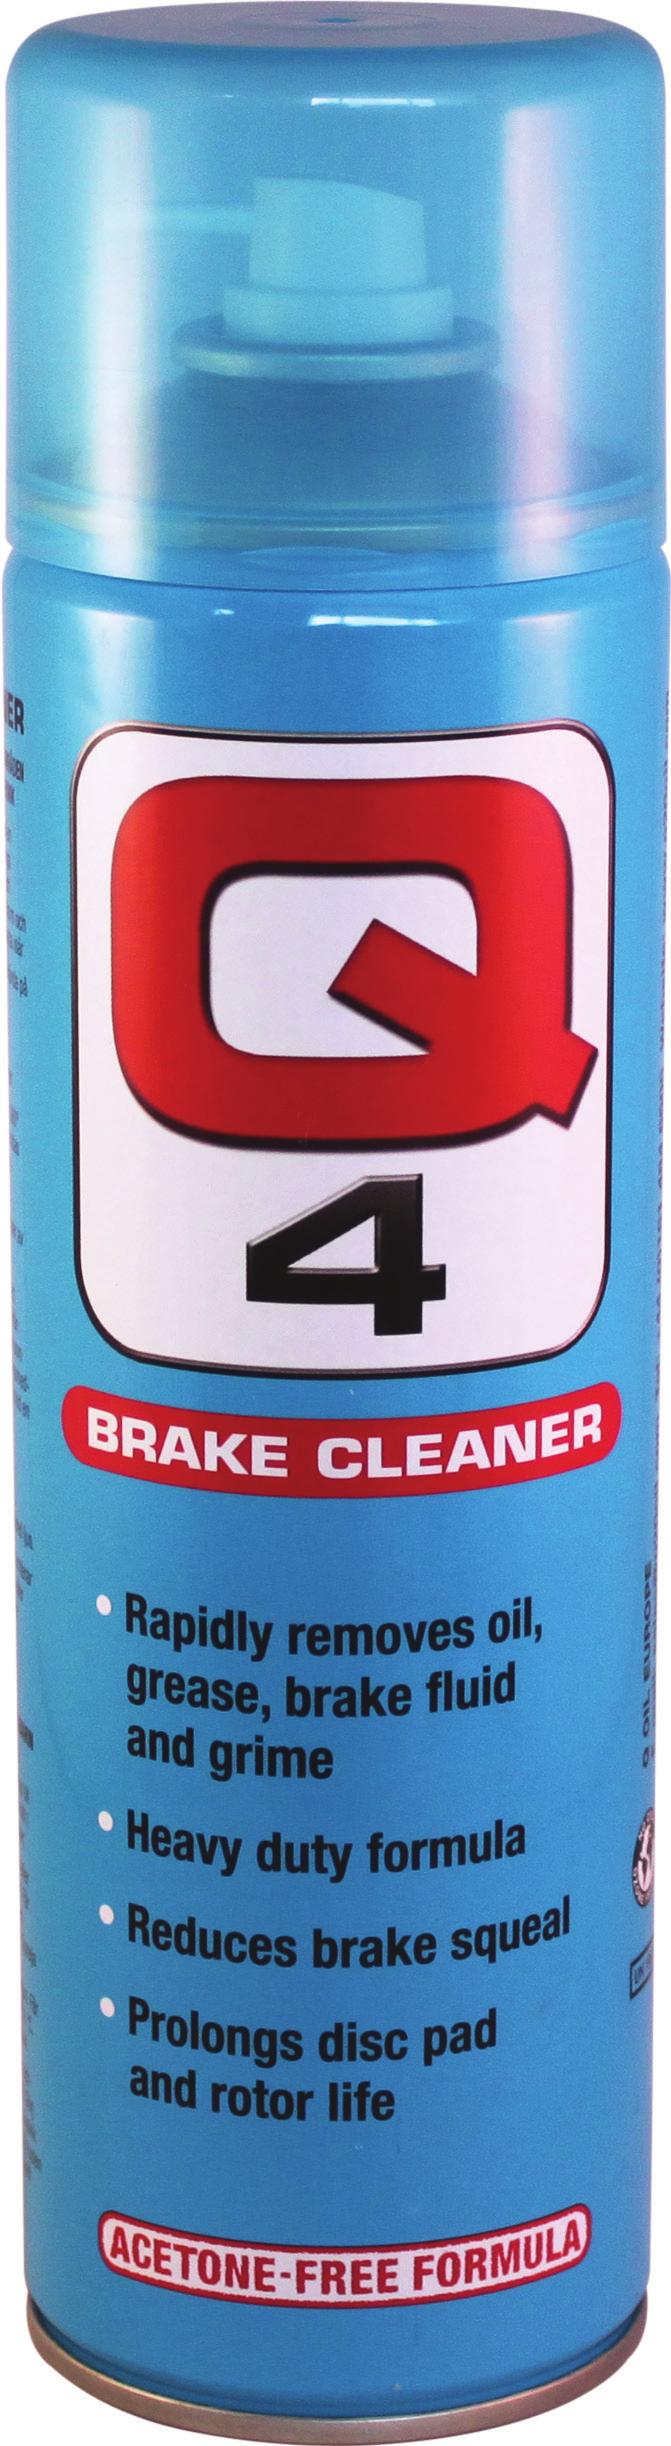 4 heavy duty brake Cleaner rapidly removes oil, grease, brake fluid & grime reduces brake squeal Prolongs brake life water free formula stuck